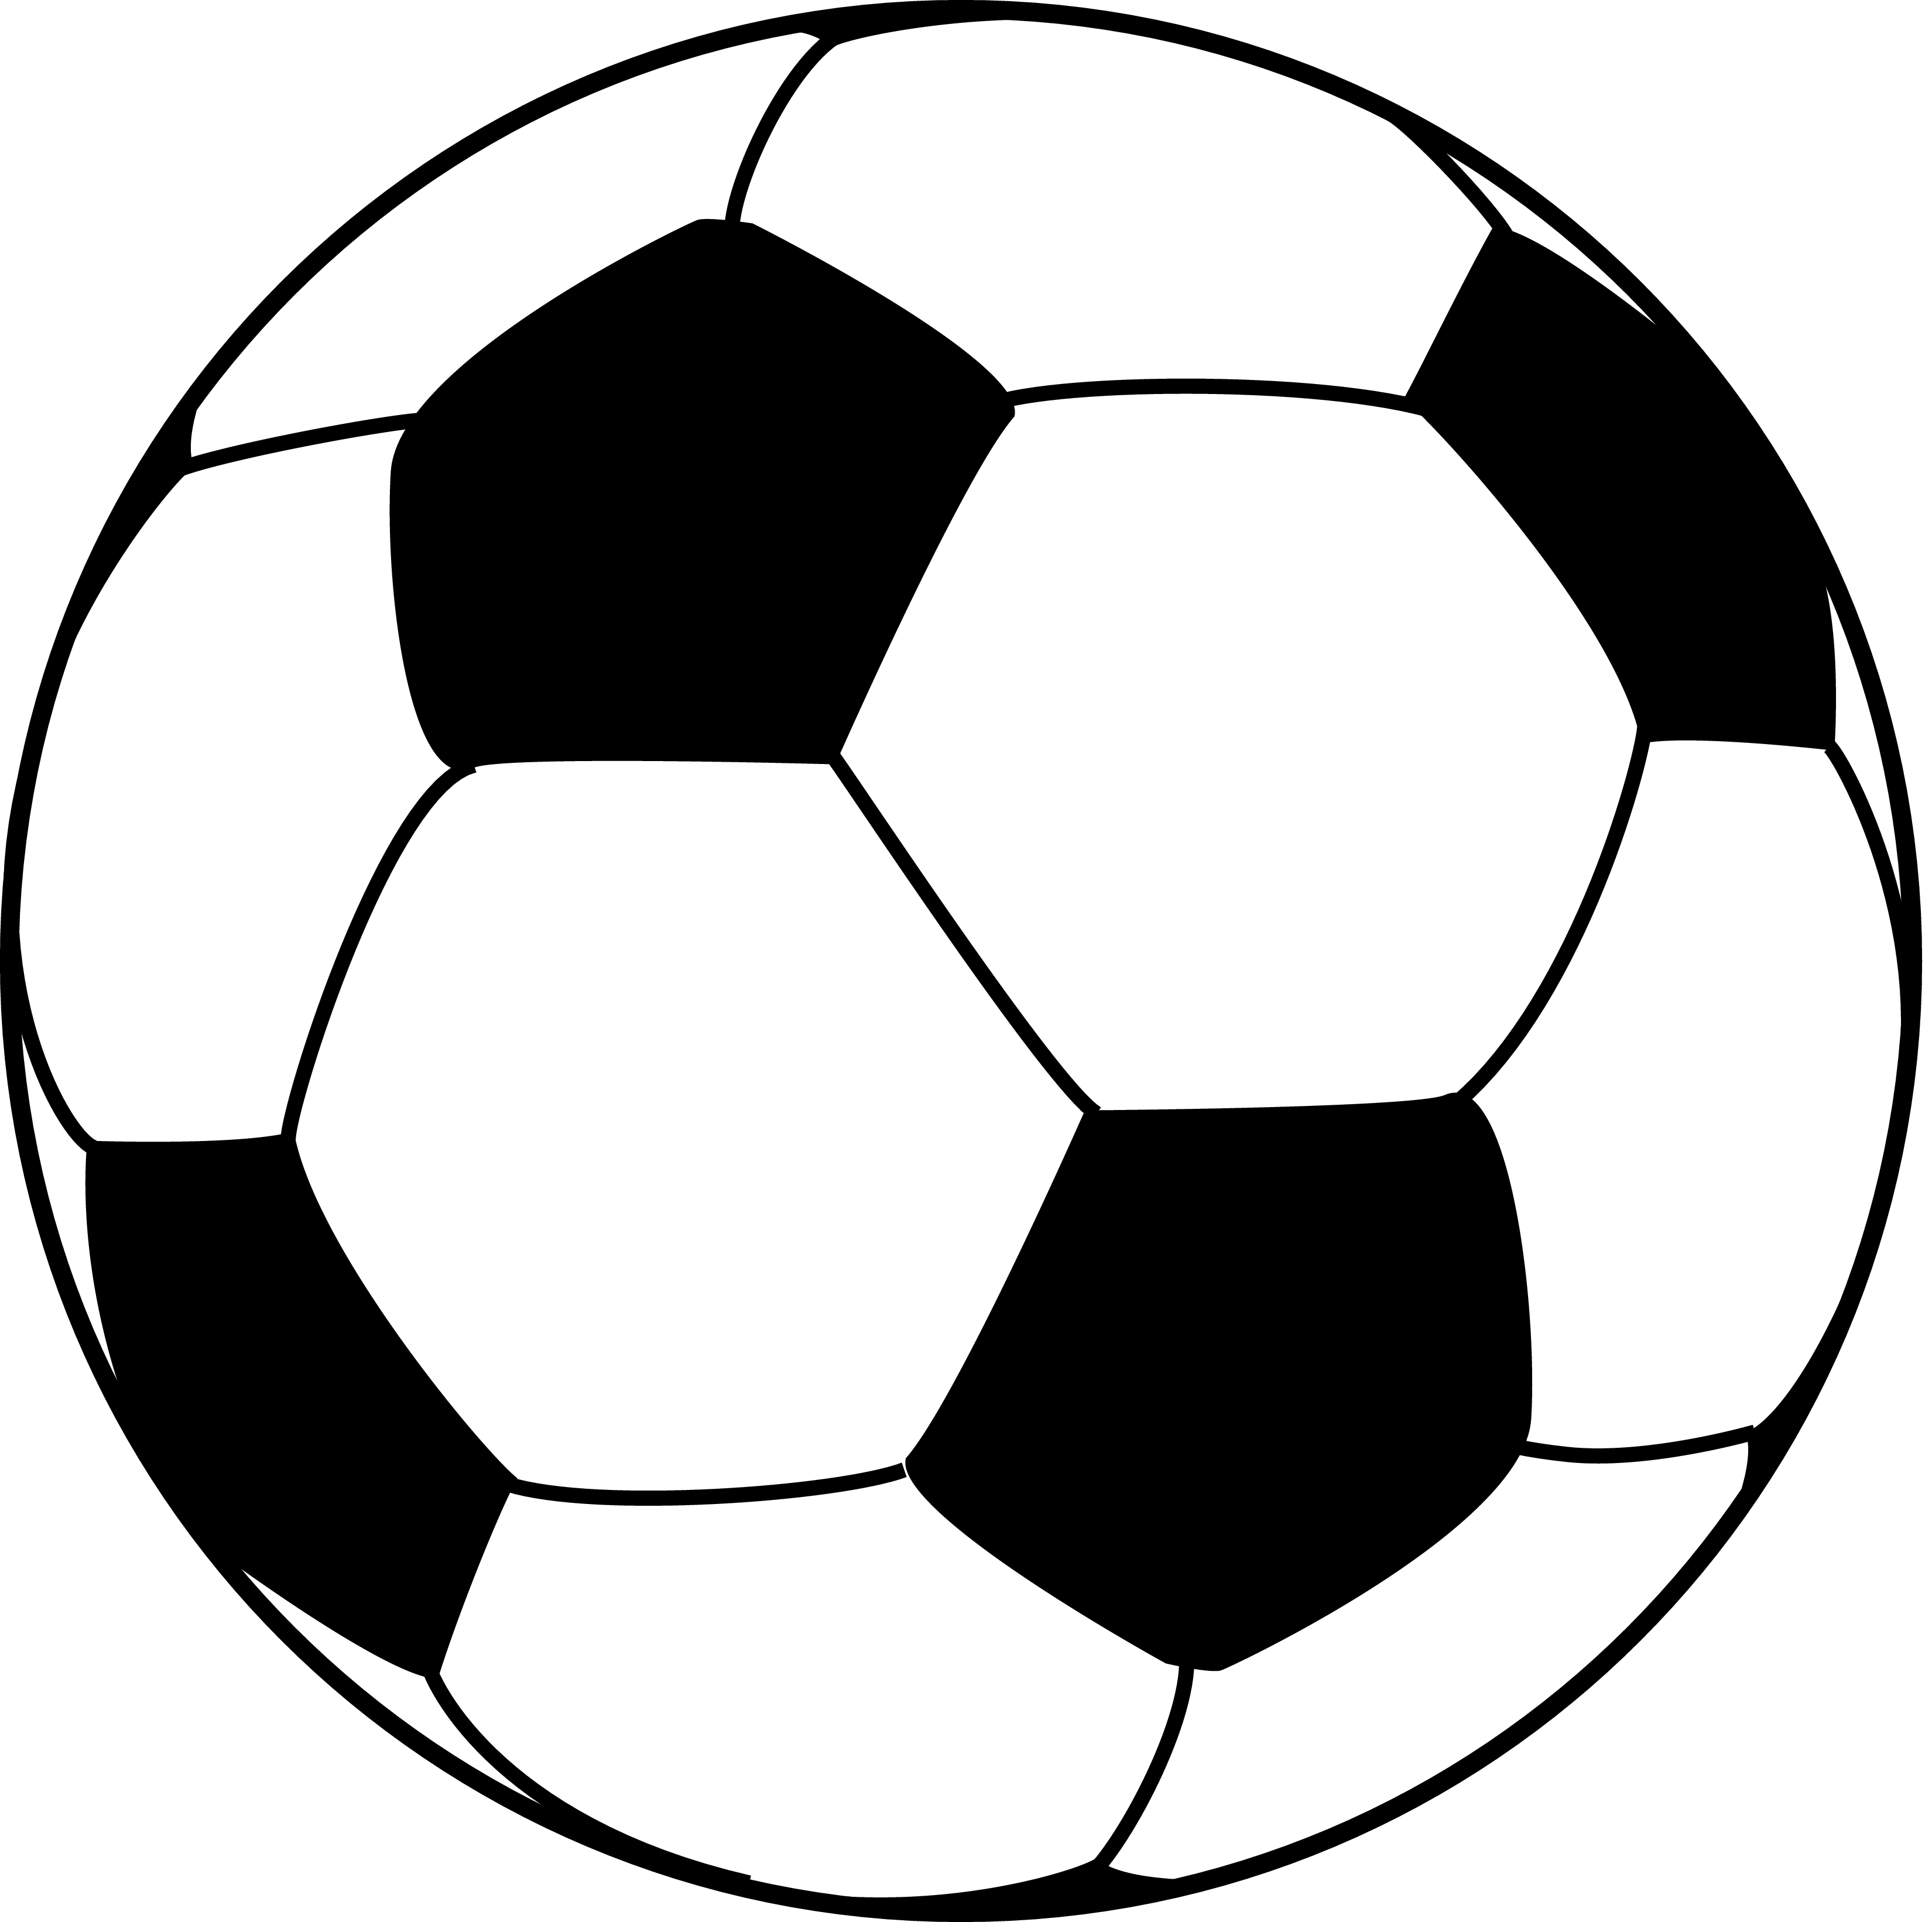 Soccer ball line drawing clipart